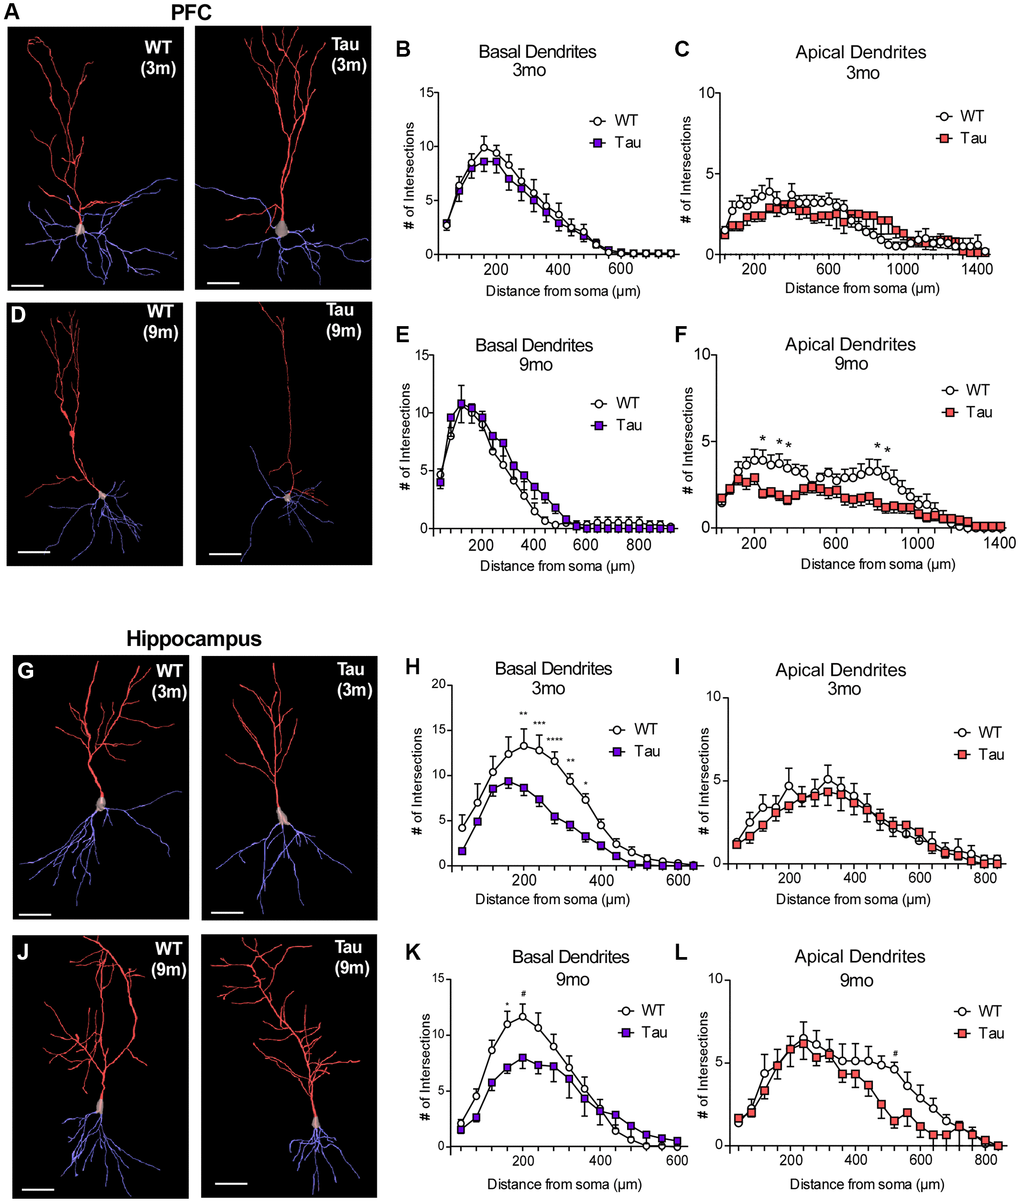 Golgi staining revealed morphological changes in pyramidal neurons of PFC and hippocampus from P301S Tau mice at different ages. (A, D, G, J) Representative reconstructed images of layer V pyramidal neurons in PFC (A, D) or CA1 hippocampus (G, J) from WT and P301S mice at 3 months (A, G) and 9 months (D, J). Basal dendrites are traced in blue, while apical dendrites are traced in red. Scale = 100 μm. (B, C, E, F) Plots of dendritic branching as measured by Sholl analysis of basal dendrites and apical dendrites of layer V PFC pyramidal neurons from WT and P301S mice at 3 months (B, C, n = 10 neurons/group) and 9 months (E, F, n = 11 neurons/group). (H, I, K, L) Plots of dendritic branching as measured by Sholl analysis of basal dendrites and apical dendrites of CA1 pyramidal neurons from WT and P301S mice at 3 months (H, I, n = 10 neurons/group) and 9 months (K, L, n = 10 neurons/group). *p **p ***p ****p 